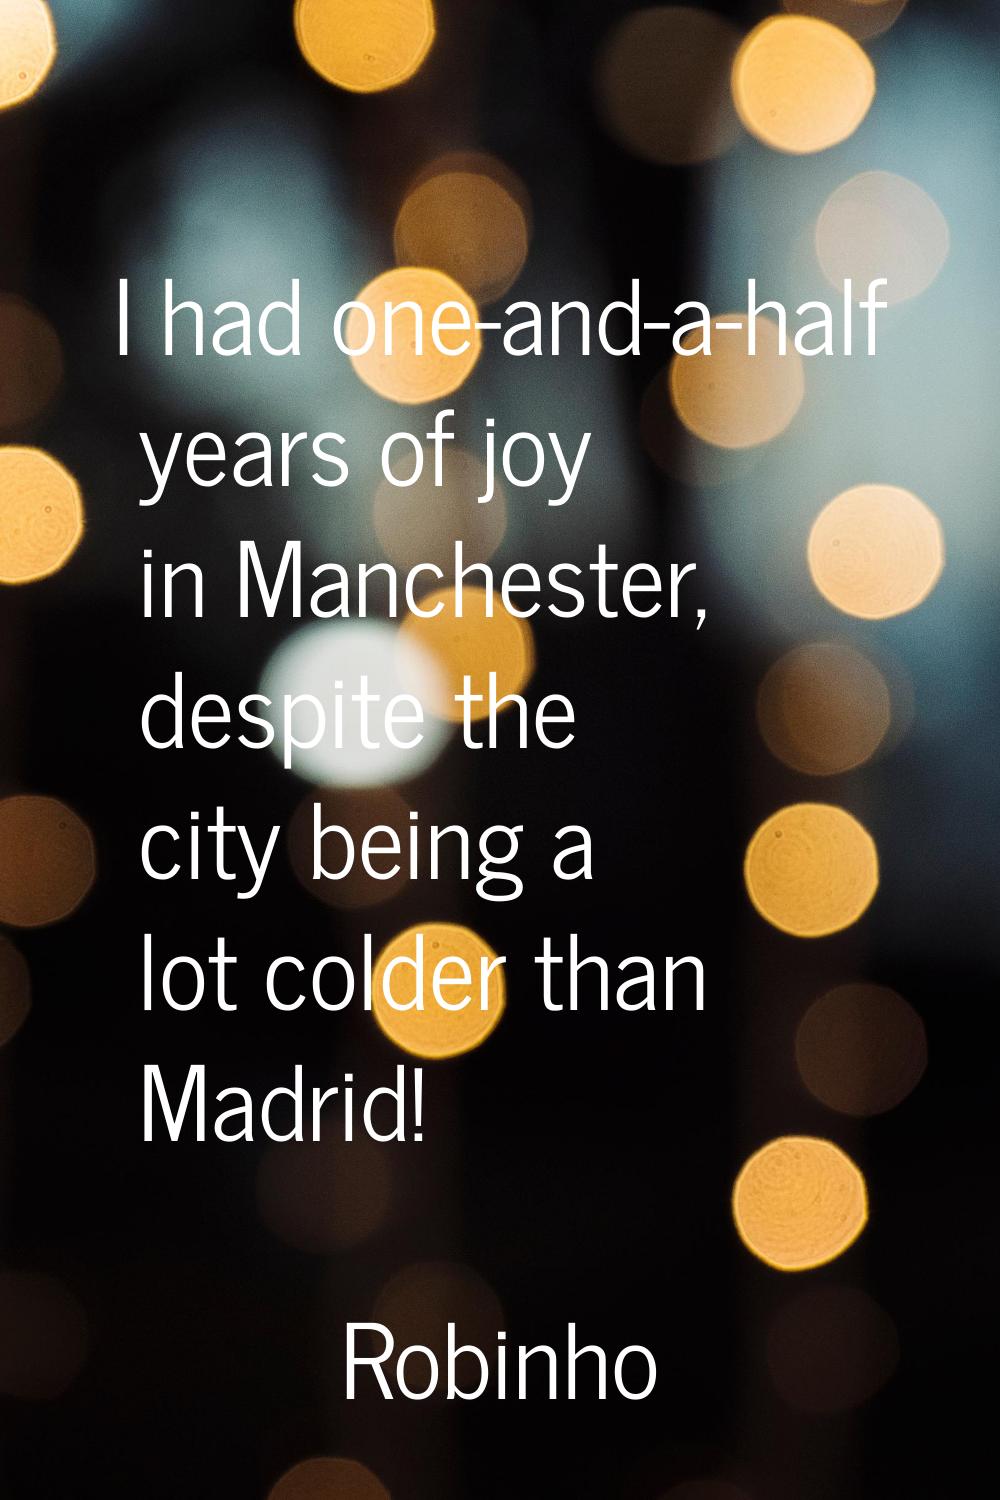 I had one-and-a-half years of joy in Manchester, despite the city being a lot colder than Madrid!